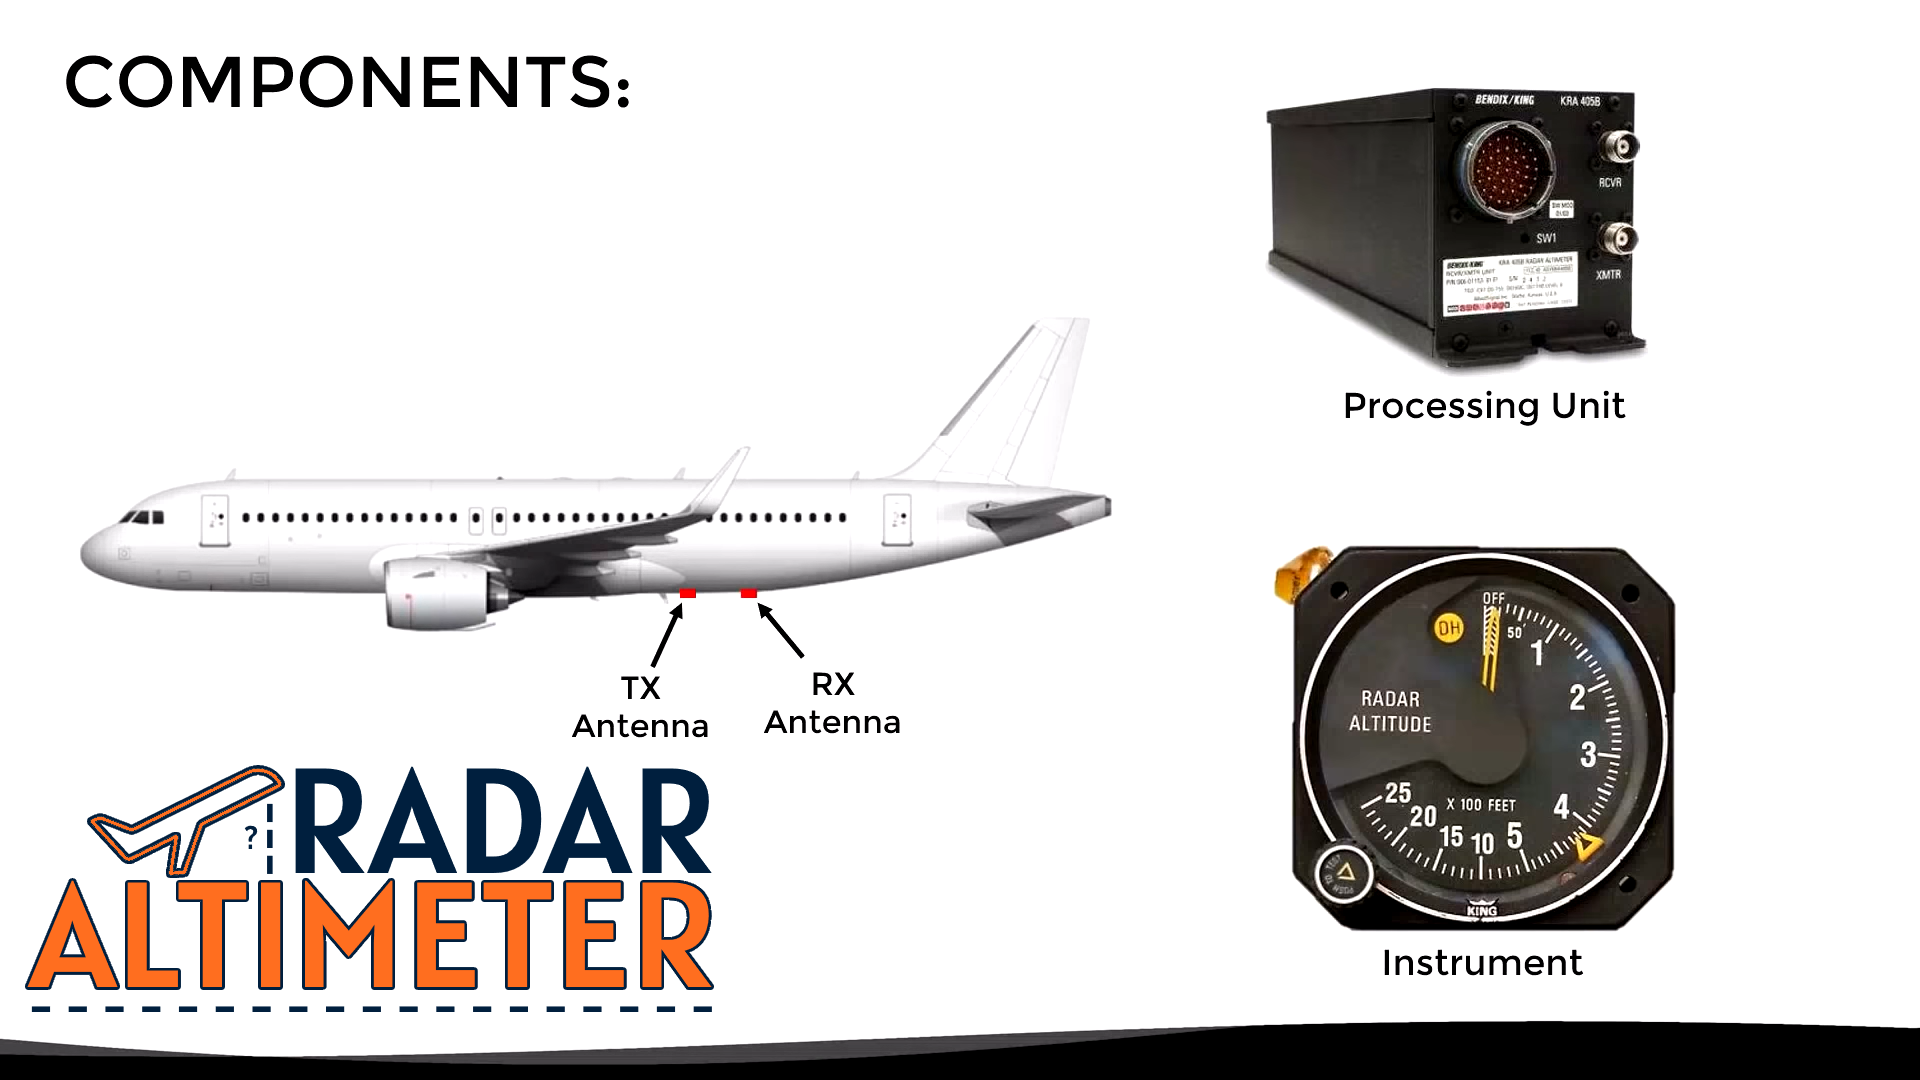 The components of a Radar Altimeter are two antennas, one serving as a transmitter and the other as a receiver, a processing unit, and an altitude indicator in the cockpit.